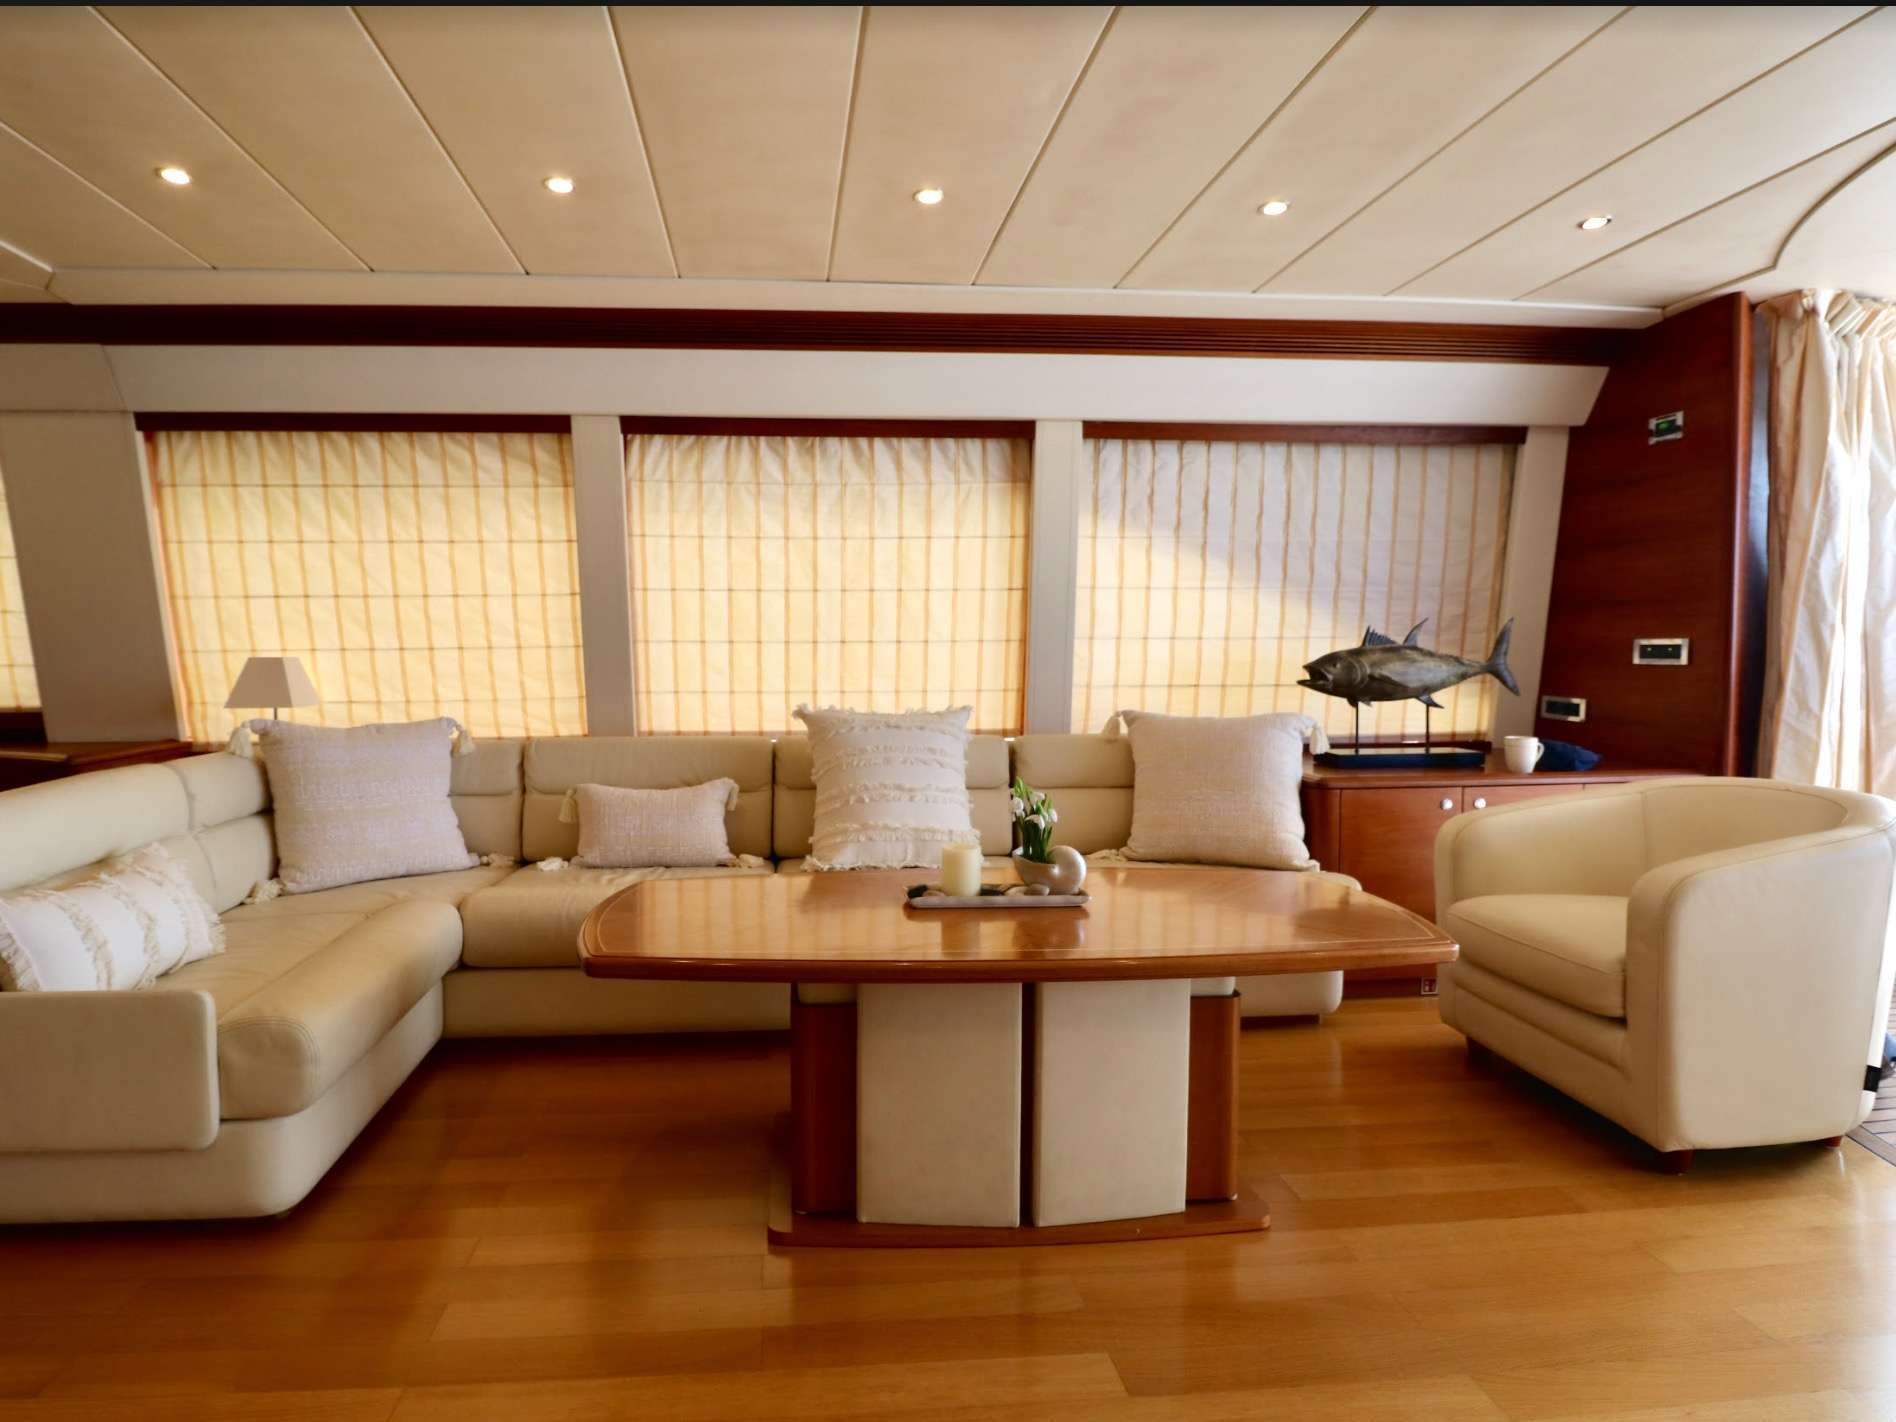 ECLIPSE 114 - Luxury yacht charter St Martin & Boat hire in Caribbean 2